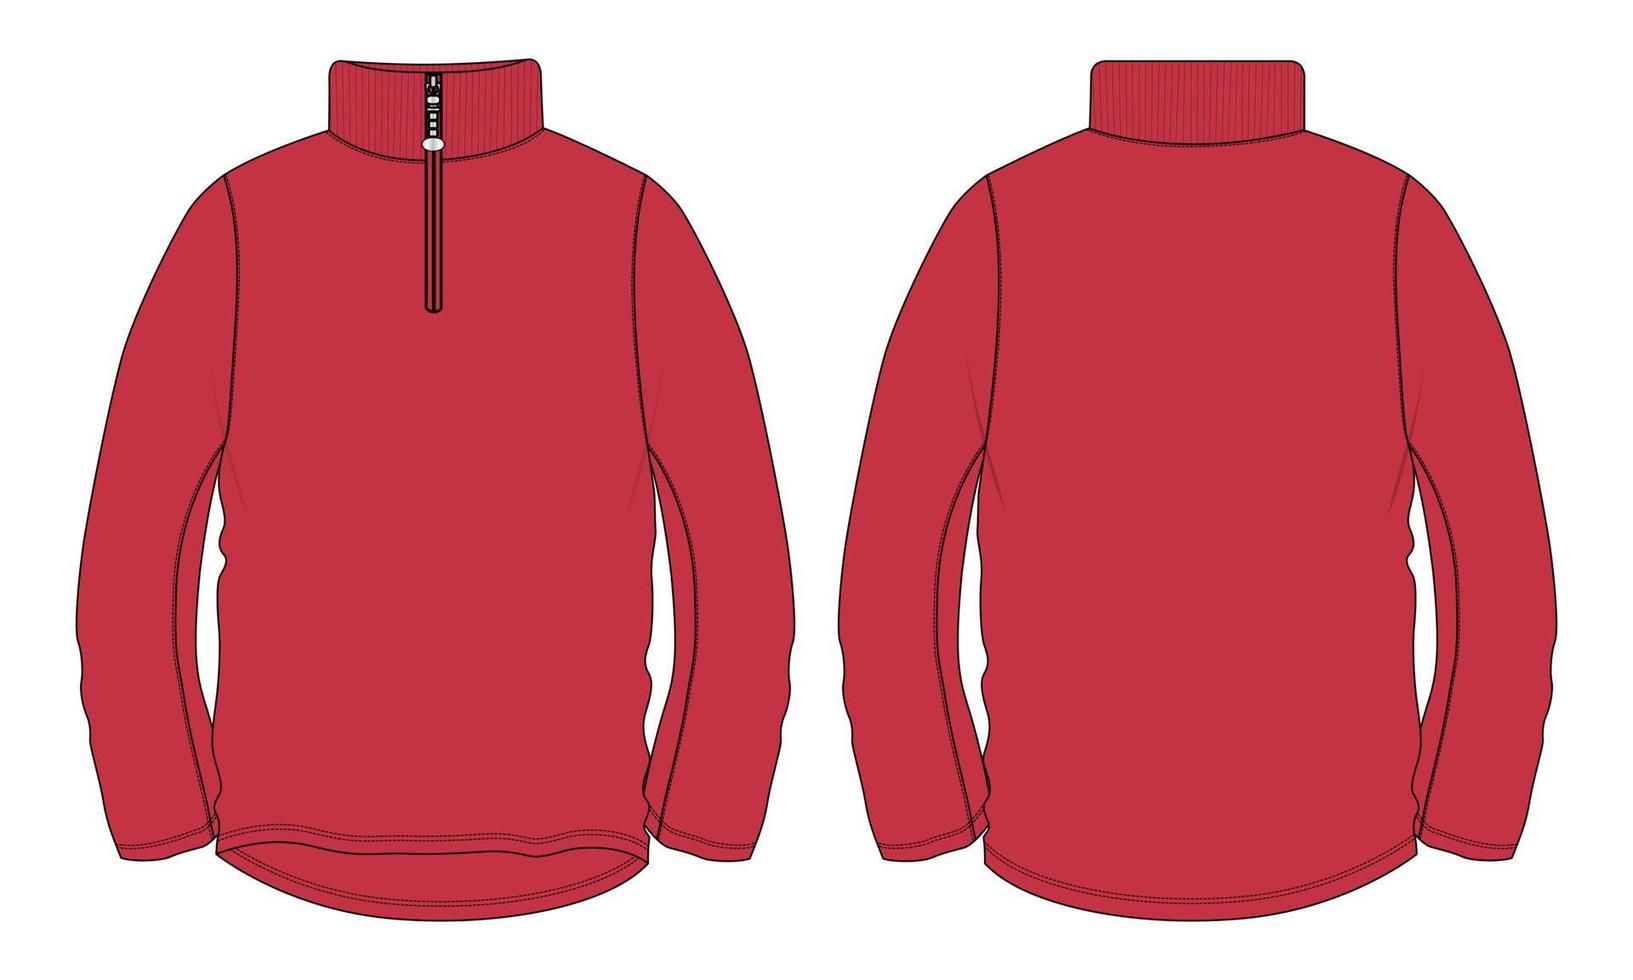 Long sleeve zipper with stand up collar jacket Sweatshirt technical fashion flat sketch vector illustration Red Color template.